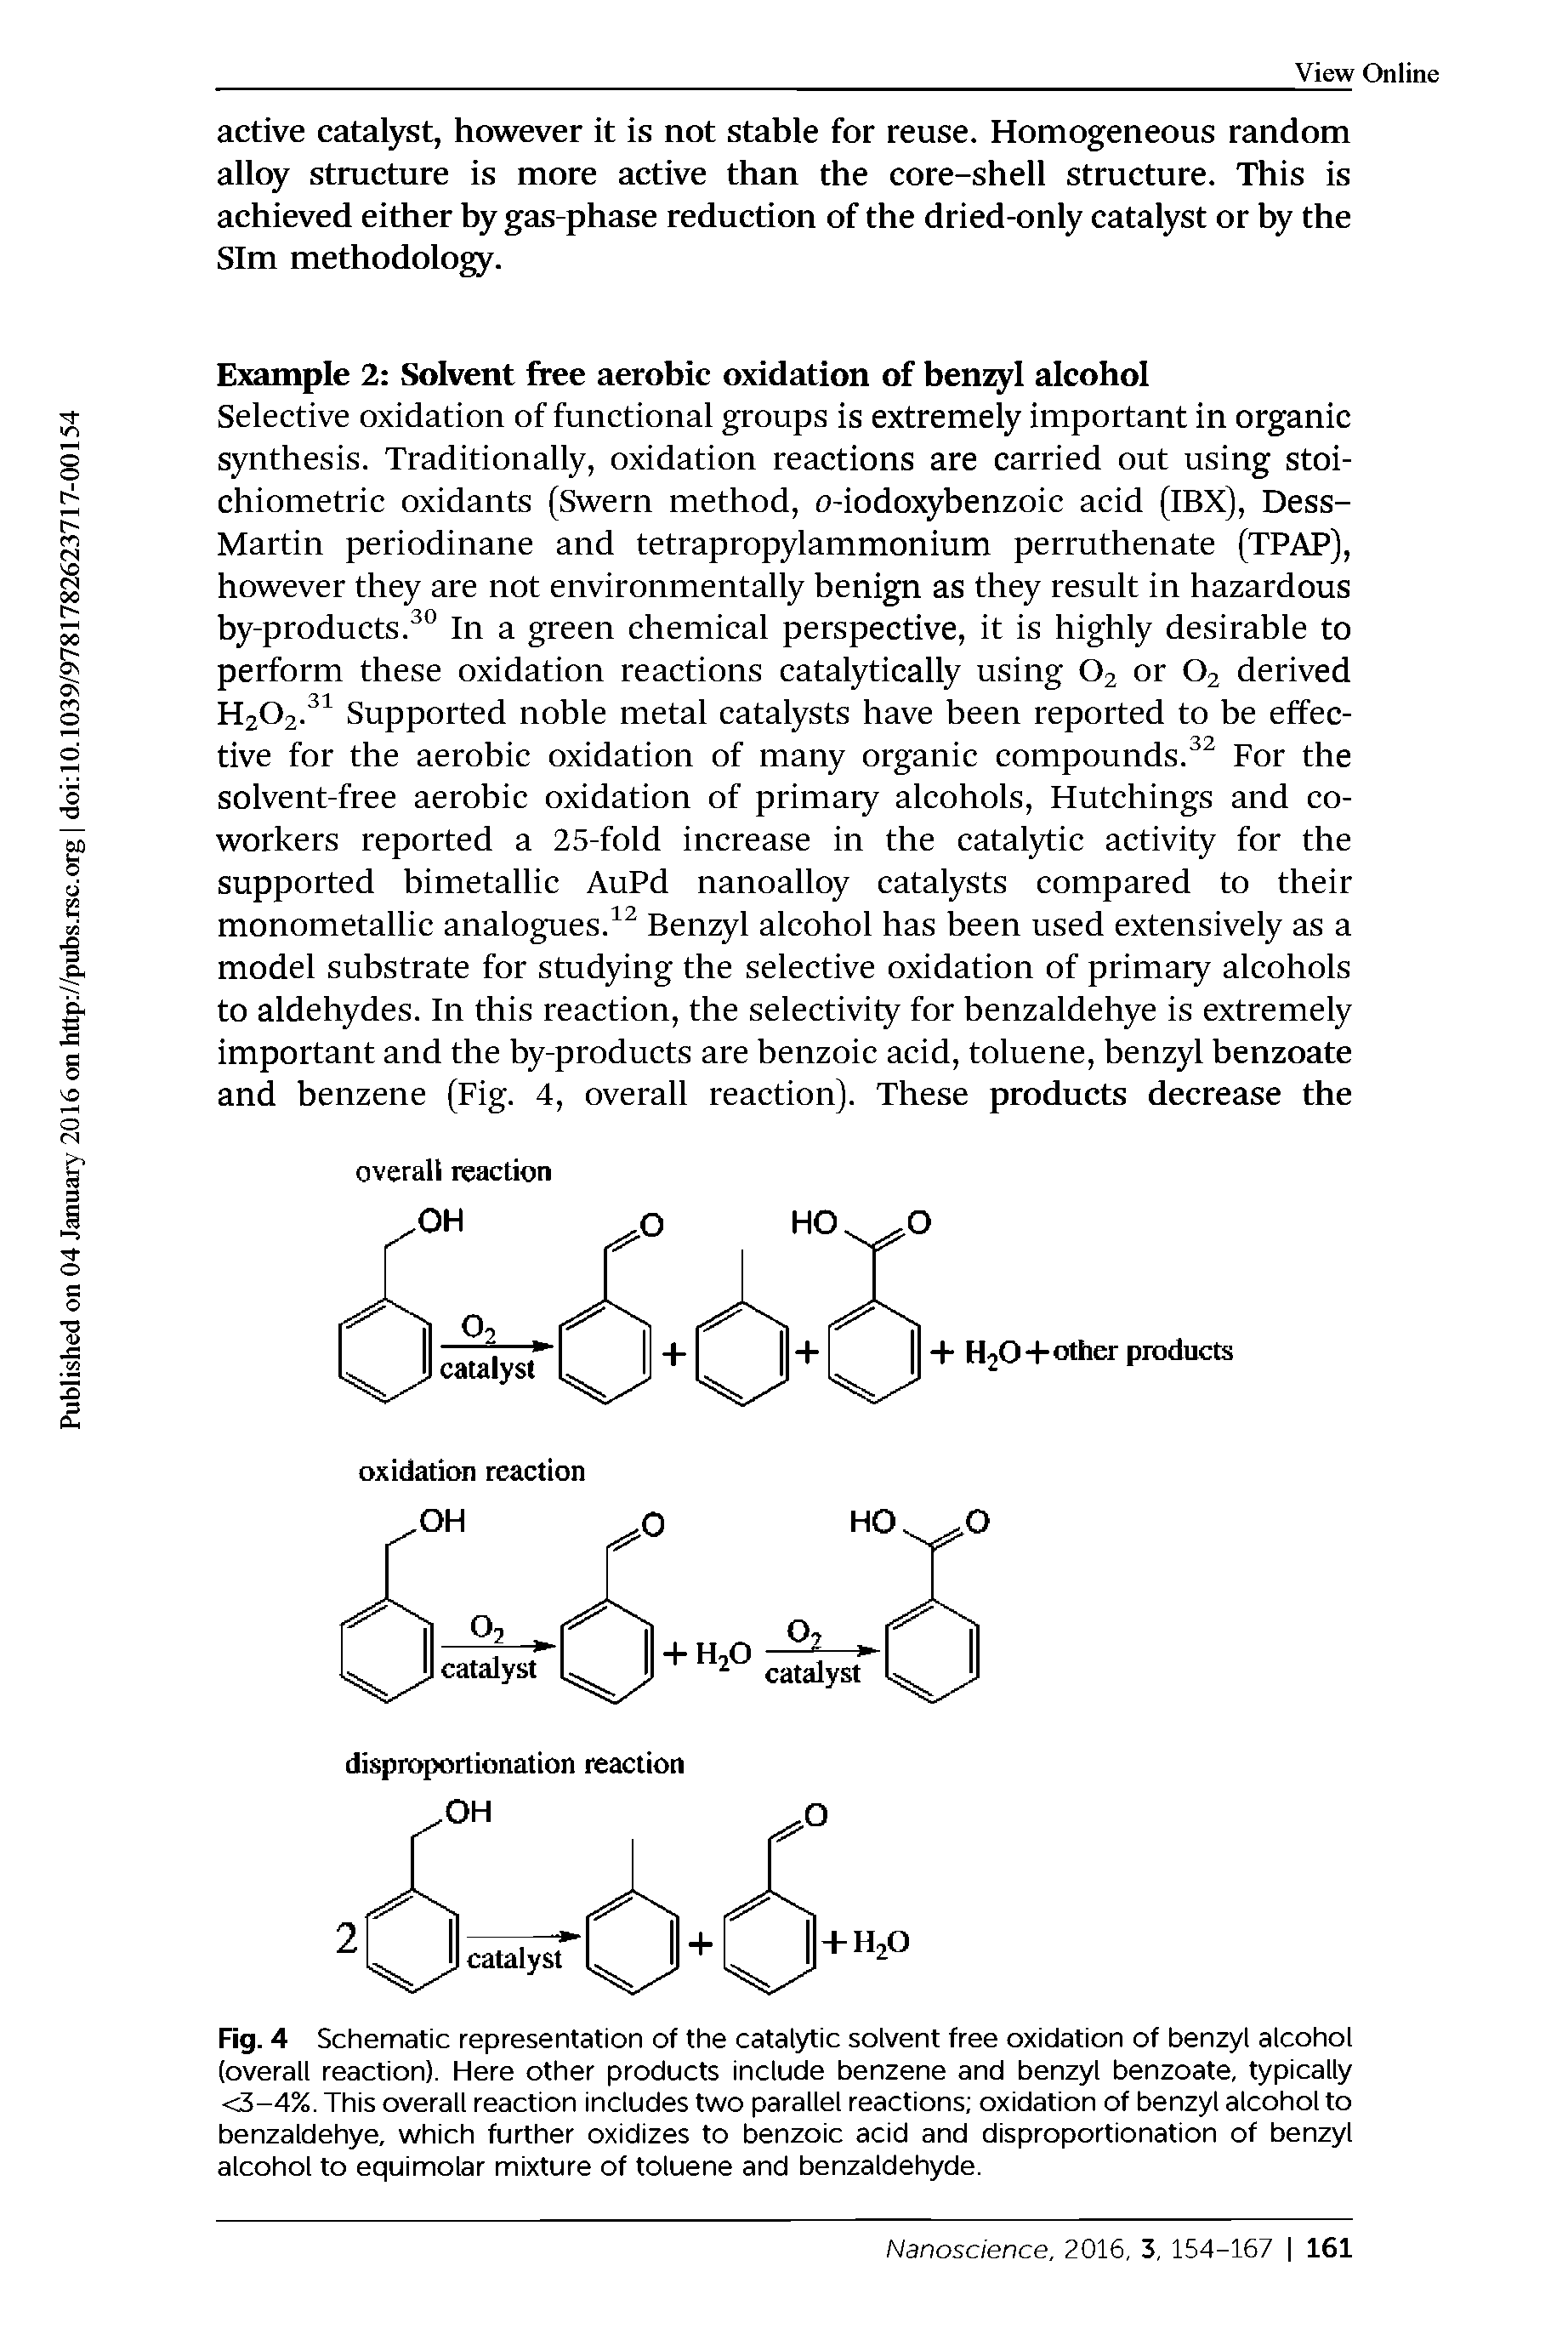 Fig. 4 Schematic representation of the catalytic solvent free oxidation of benzyl alcohol (overall reaction). Here other products include benzene and benzyl benzoate, typically <3-4%. This overall reaction includes two parallel reactions oxidation of benzyl alcohol to benzaldehye, which further oxidizes to behzoic acid and disproportionation of benzyl alcohol to equimolar mixture of toluene and benzaldehyde.